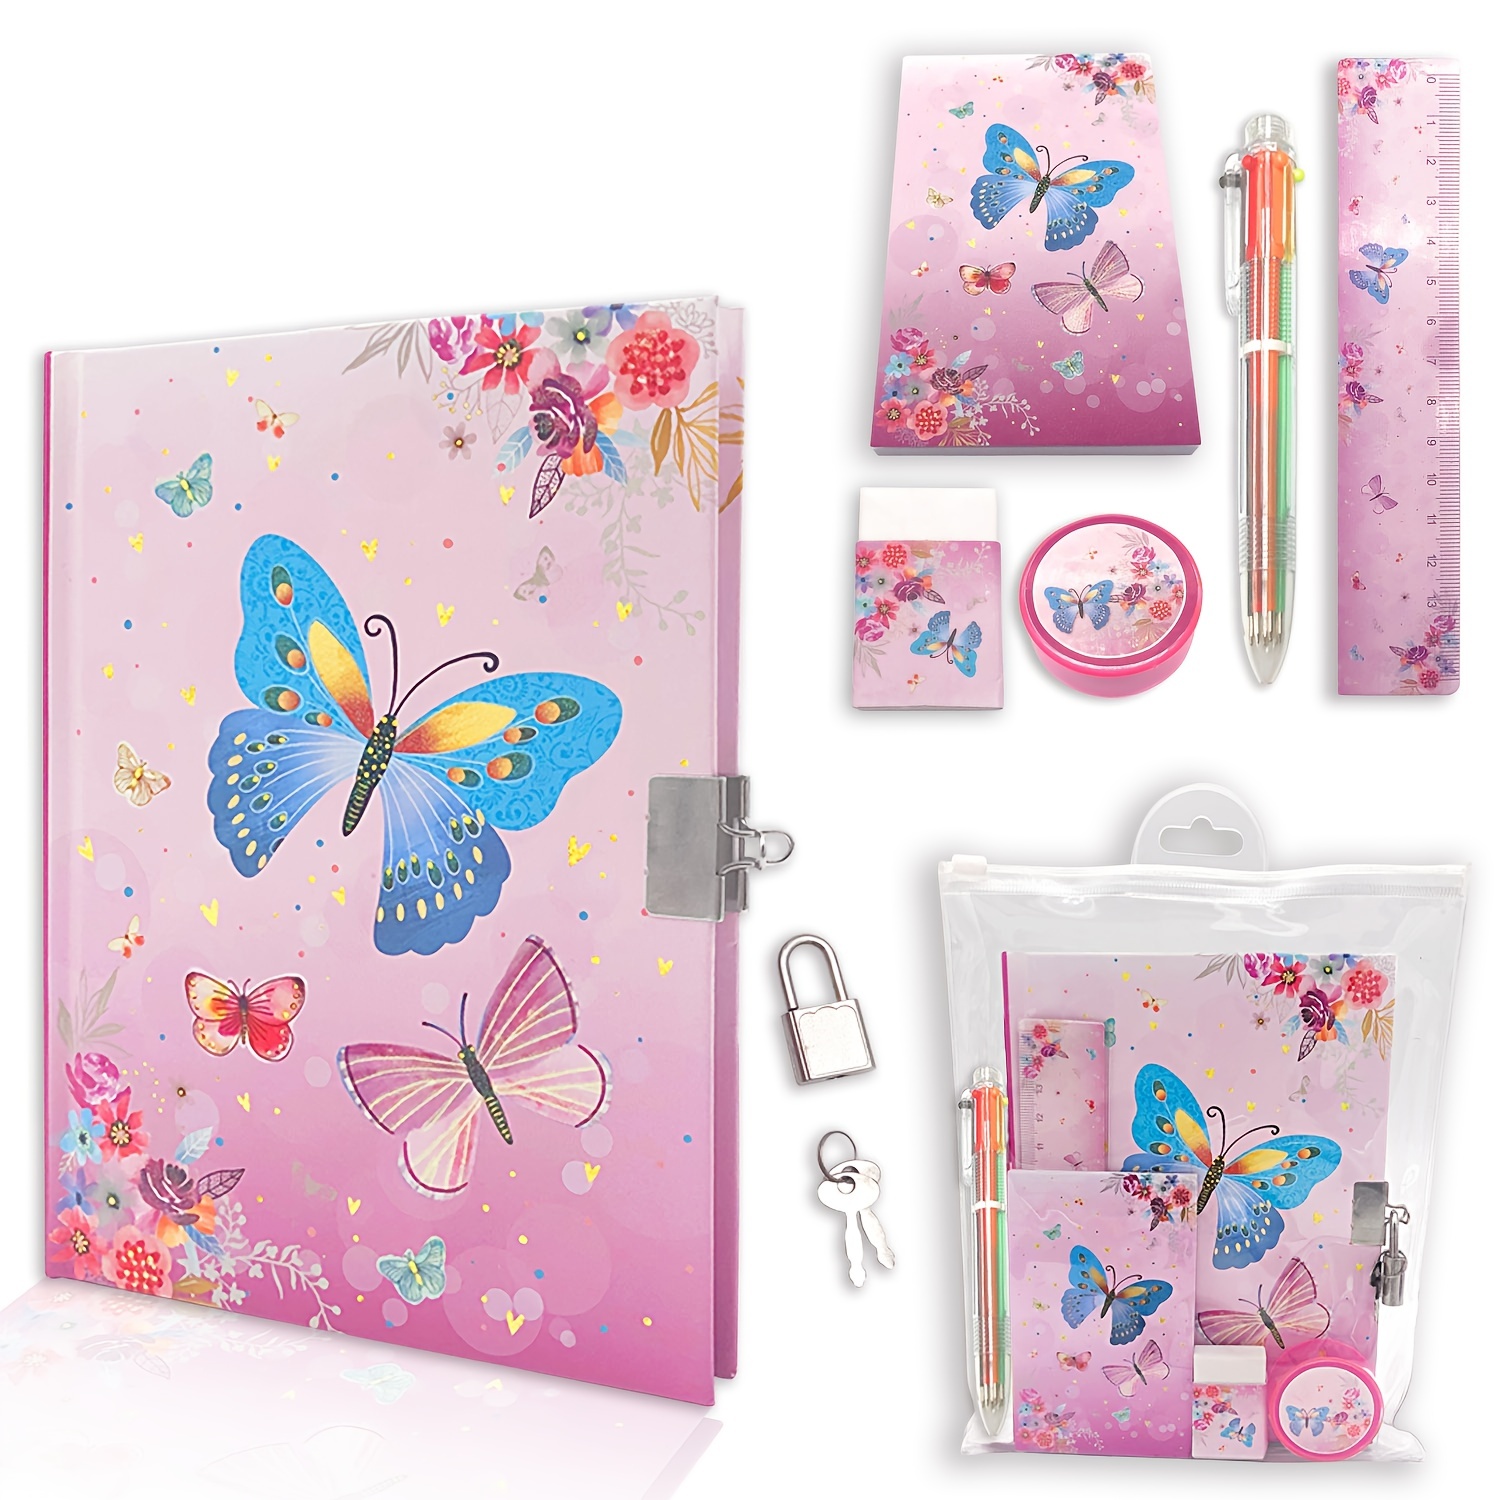 GINMLYDA Girls Diary with Lock, Kids Journal Stationary Set for Preschool Teen Learning Writing Drawing Age 6,8,10,12 Years Butterfly Gif